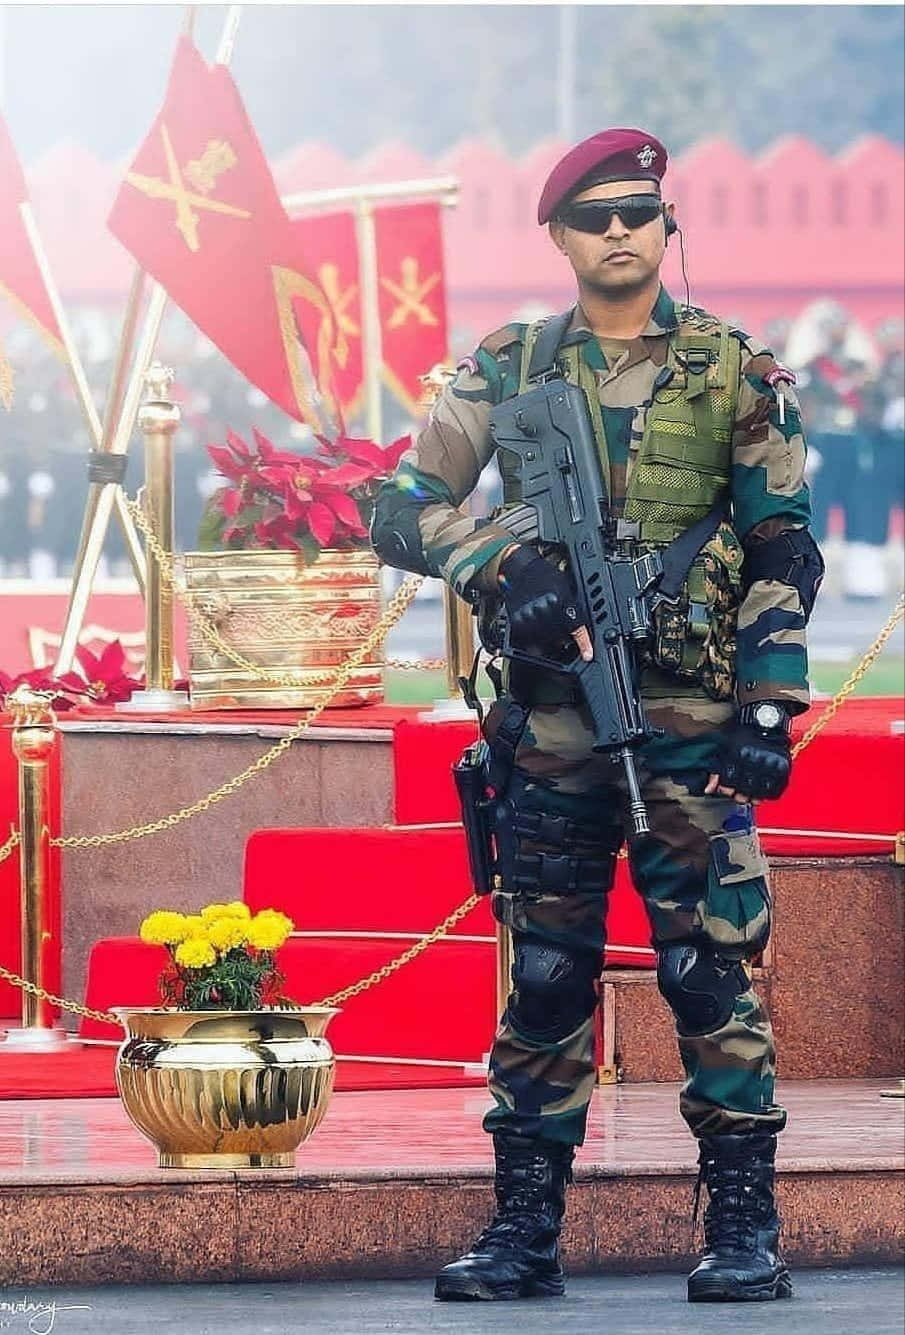 "Strength and Honor In India's Army"